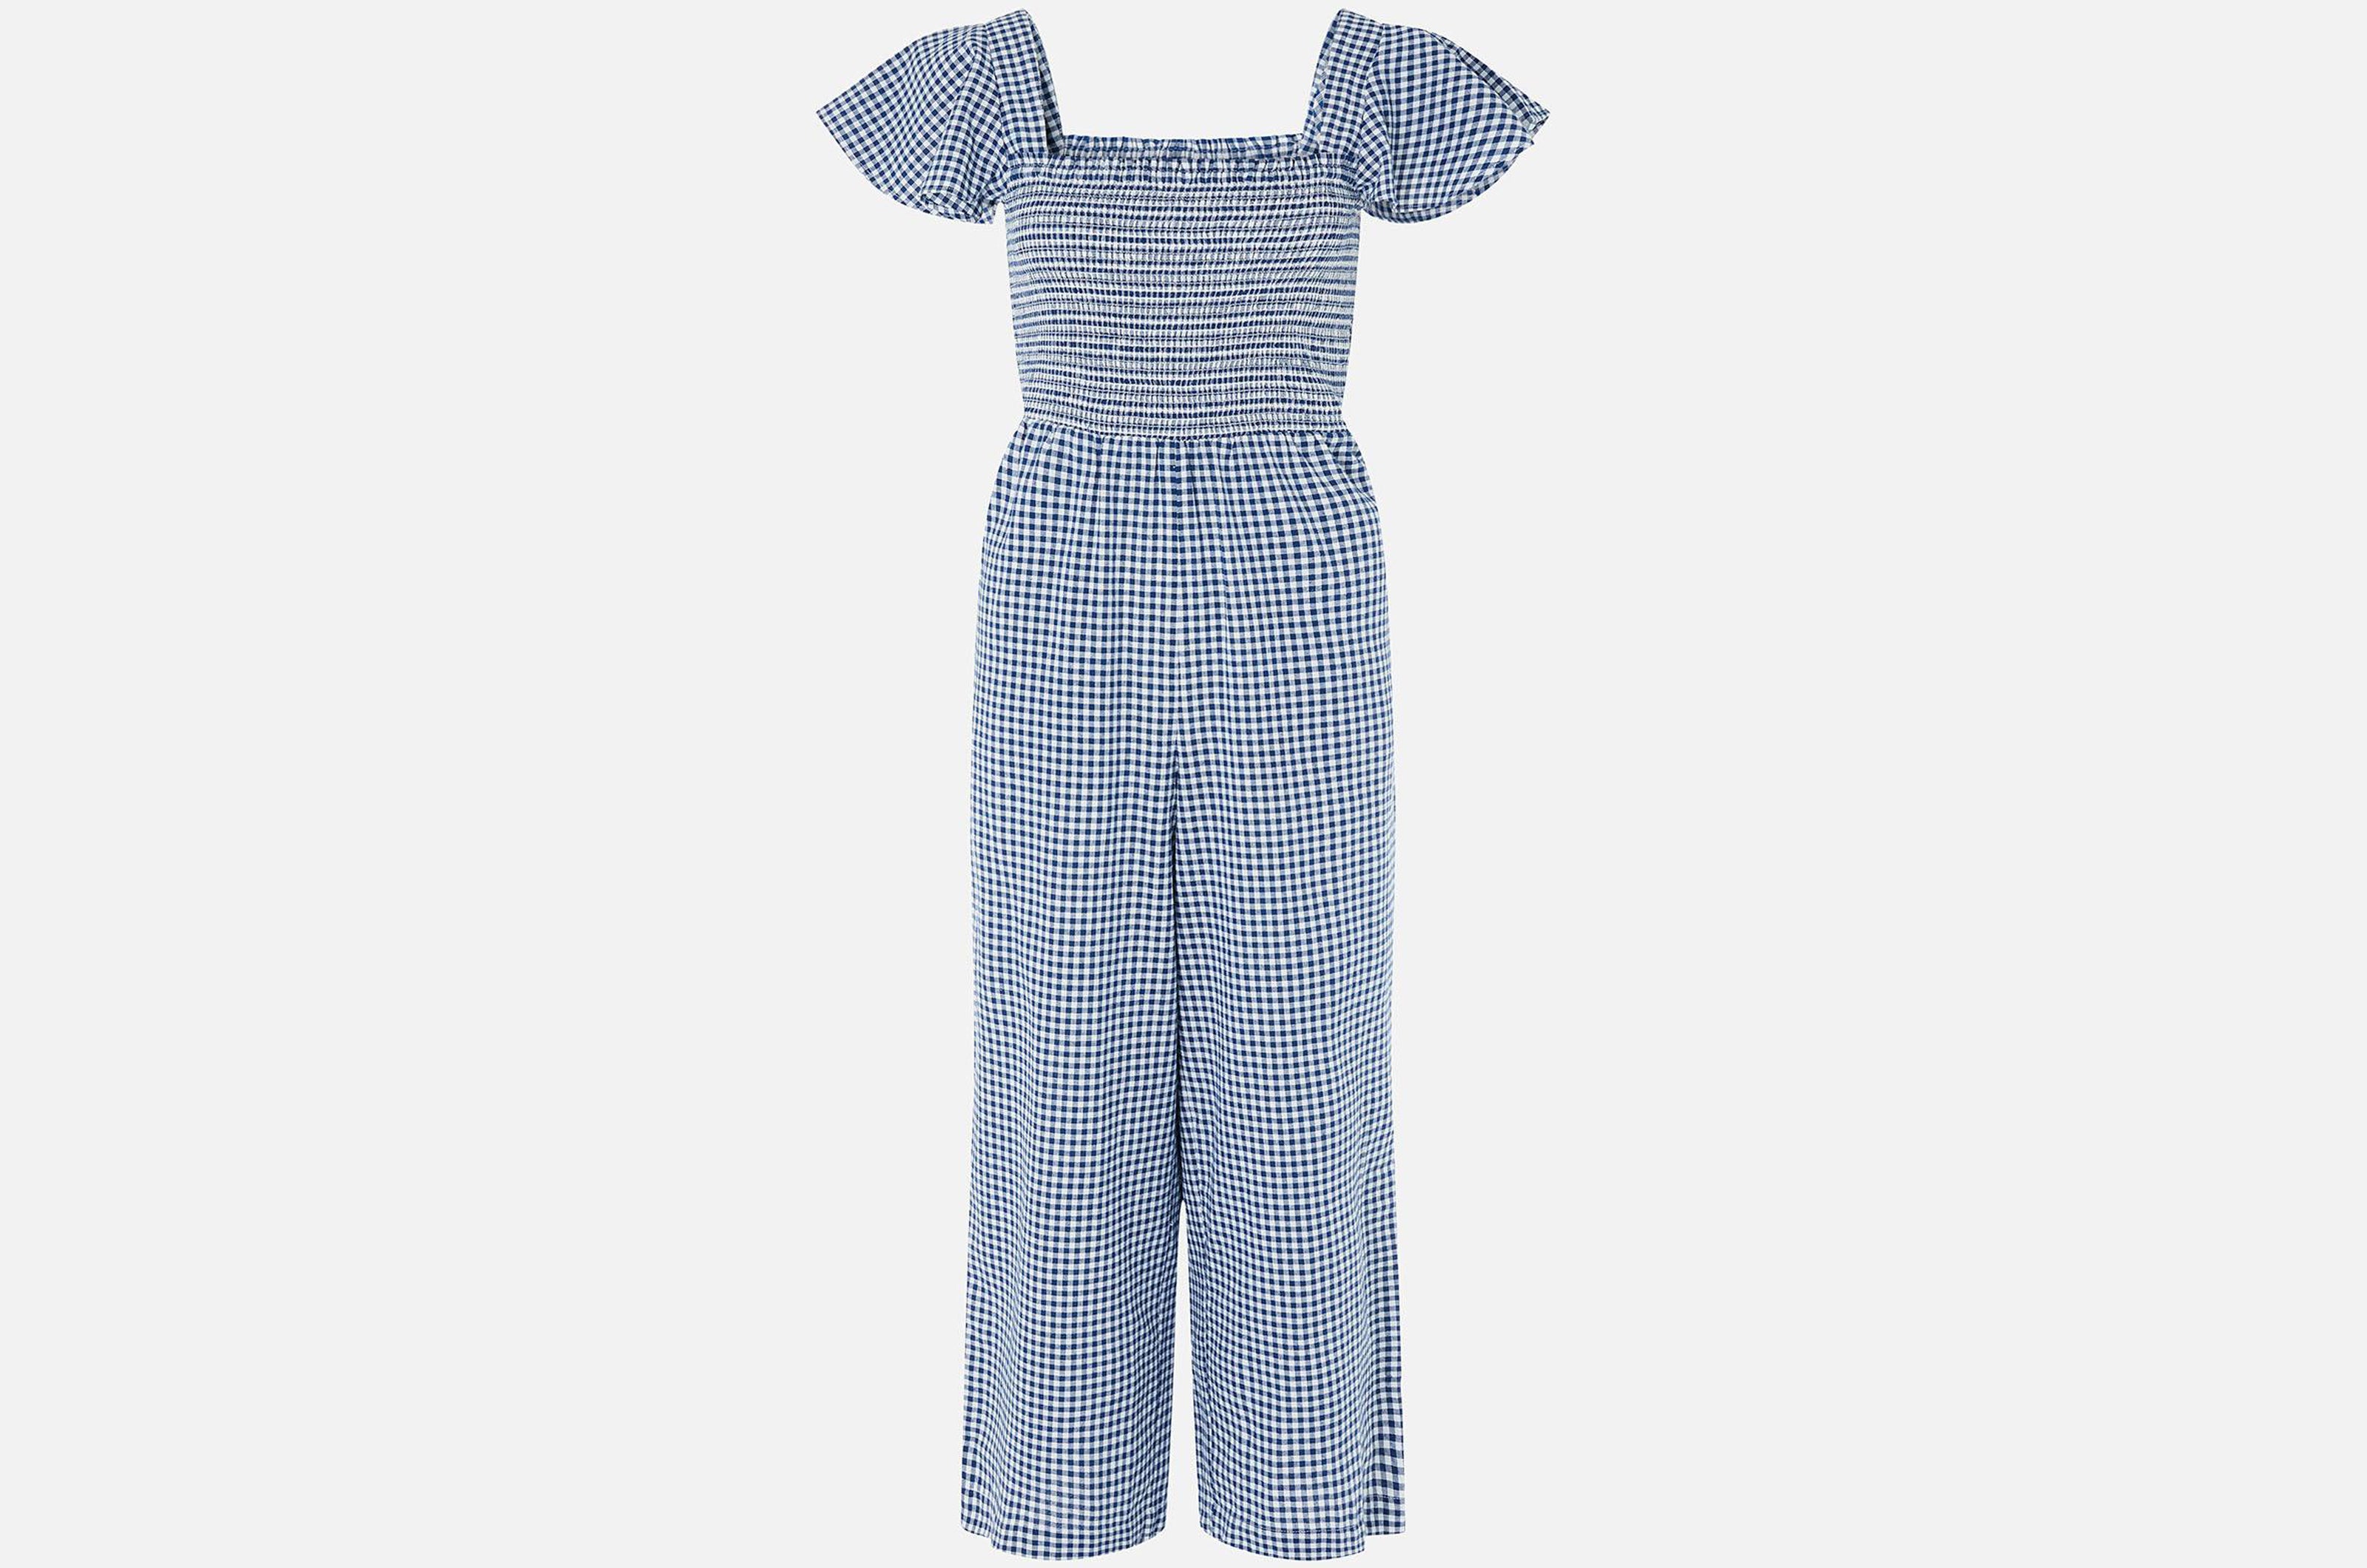 Accessorize Gingham Print Smocked Jumpsuit Blue, ?31.50 (was ?45)